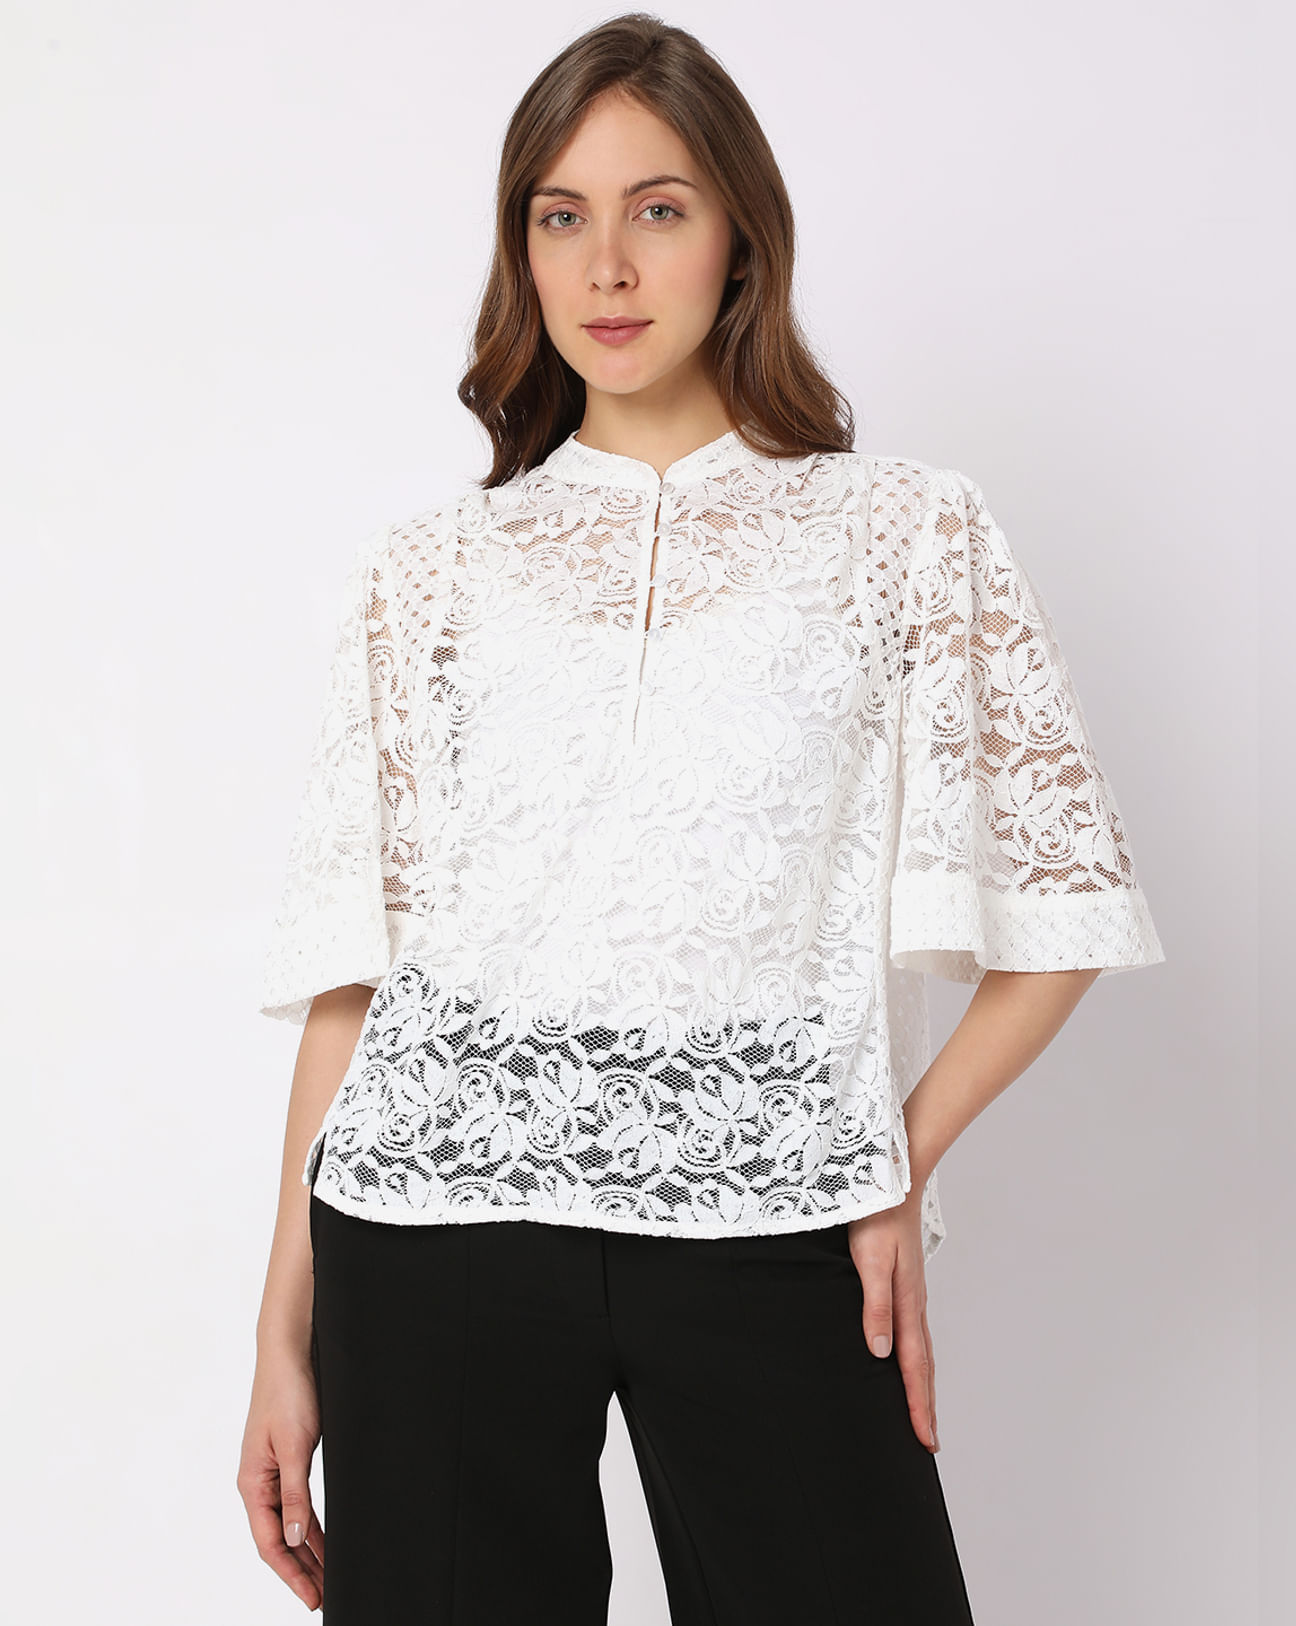 Buy White Lace Top For Women Online in India